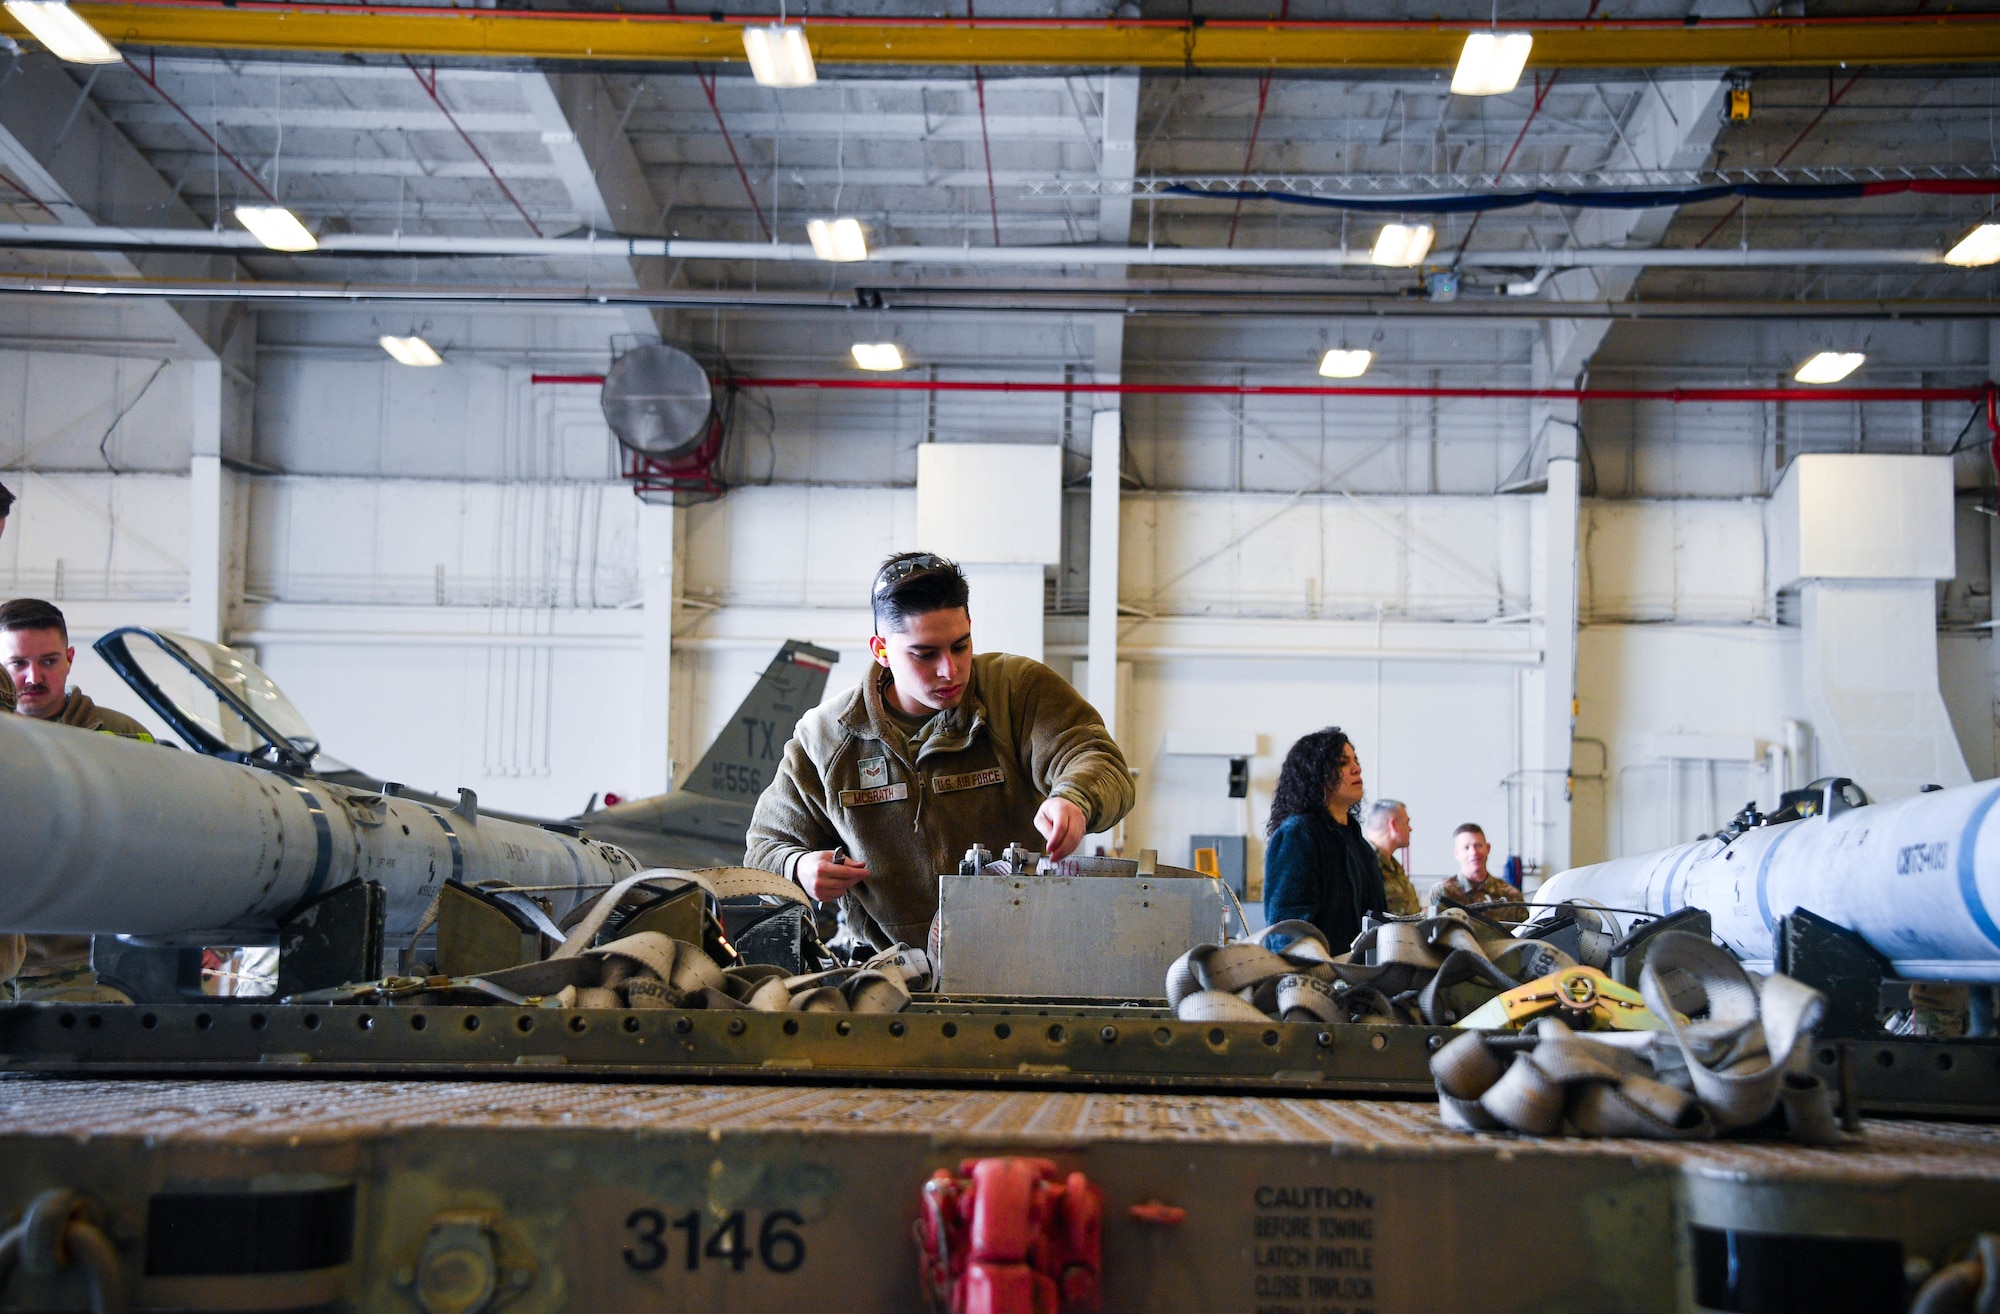 Senior Airman Vincent McGrath, 301st Fighter Wing Aircraft Maintenance Squadron load crew member, looks for tools at Naval Air Station Joint Base Fort Worth, Texas, January 9, 2022. The 301 FW annual weapons competition gives Airmen an opportunity to practice their technical skills in a controlled environment.